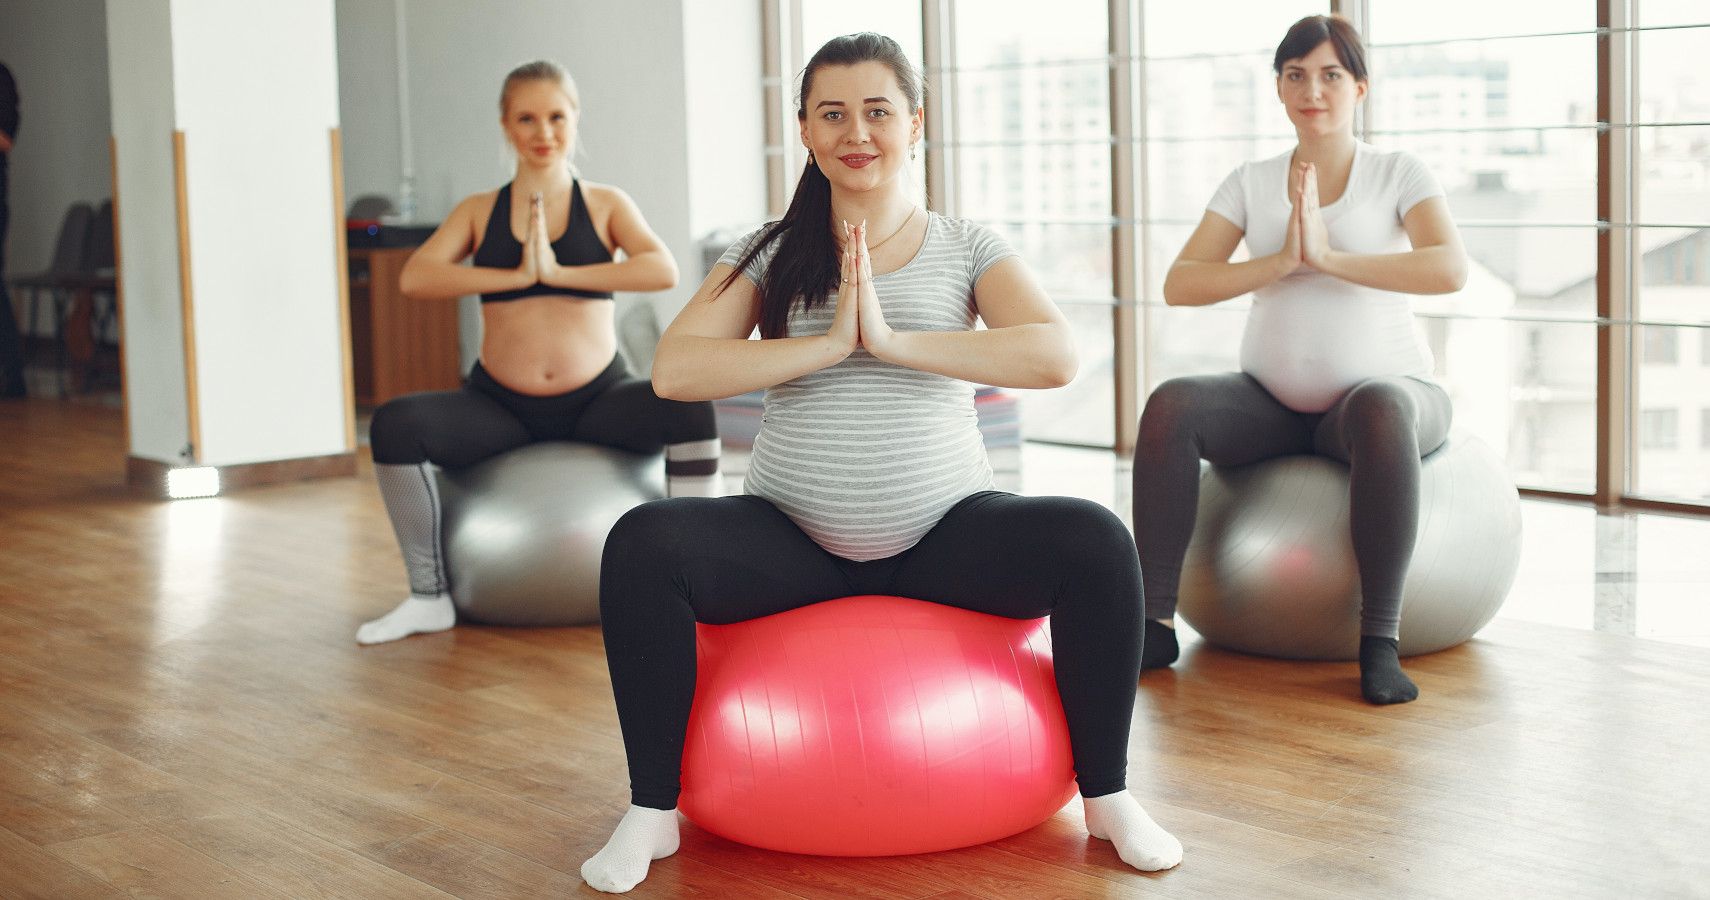 Three pregnant women working out together in the gym.